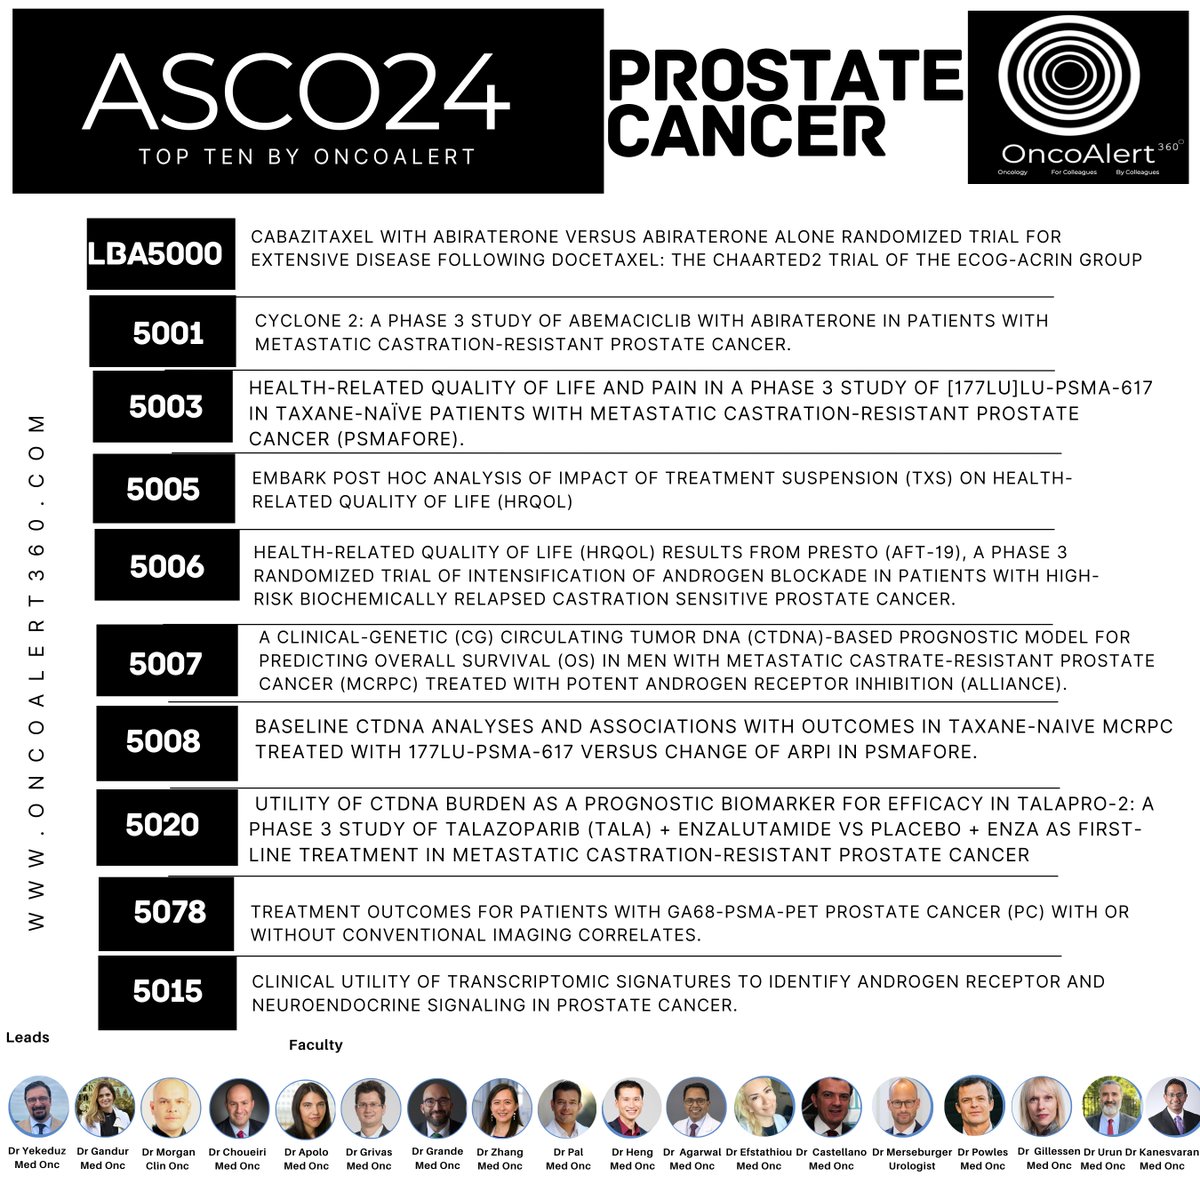 Dear Colleagues, The @OncoAlert 🚨Network Presents OUR Picks of TOP 🔟Abstracts to be Presented at #ASCO24 for #ProstateCancer This List Curated by: #OncoAlertAF Leads : @yekeduz_emre 🇺🇸 @nataliagandur 🇦🇷 @weoncologists 🇺🇸 Distinguished faculty @DrChoueiri 🇺🇸